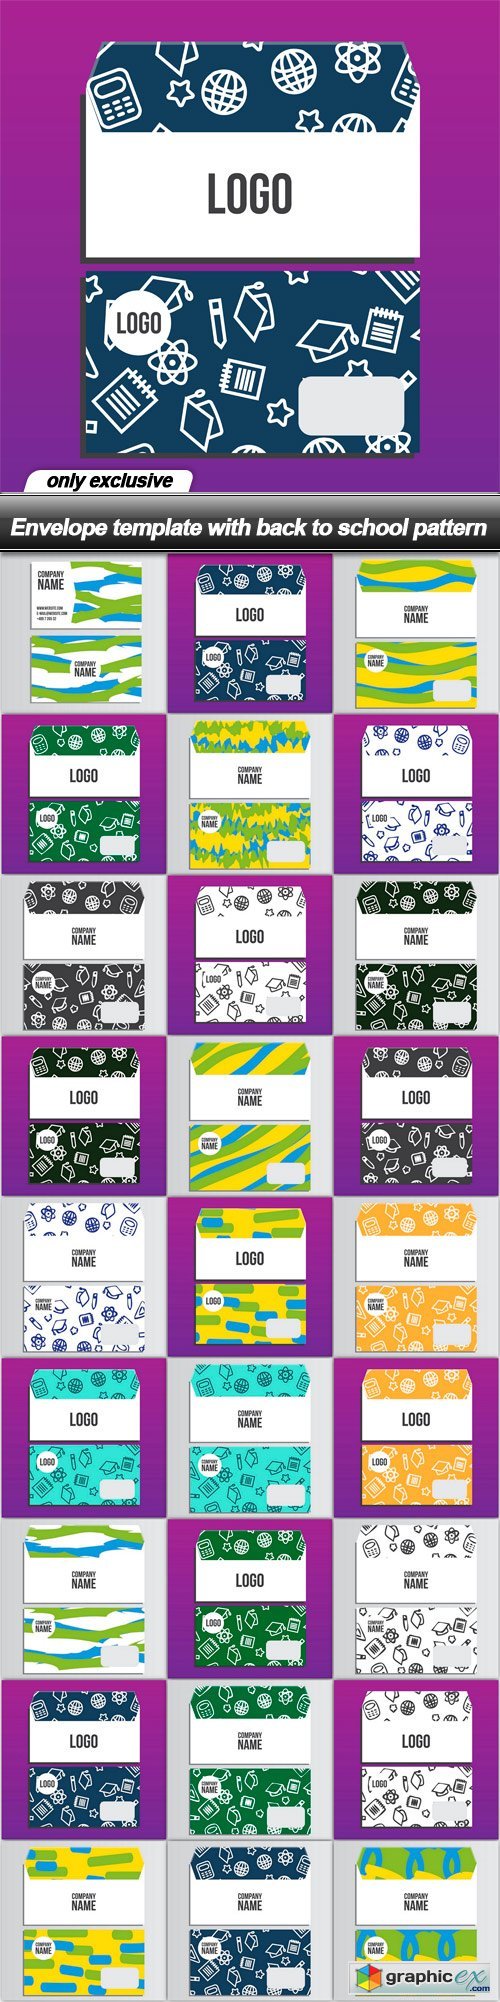 Envelope template with back to school pattern - 26 EPS